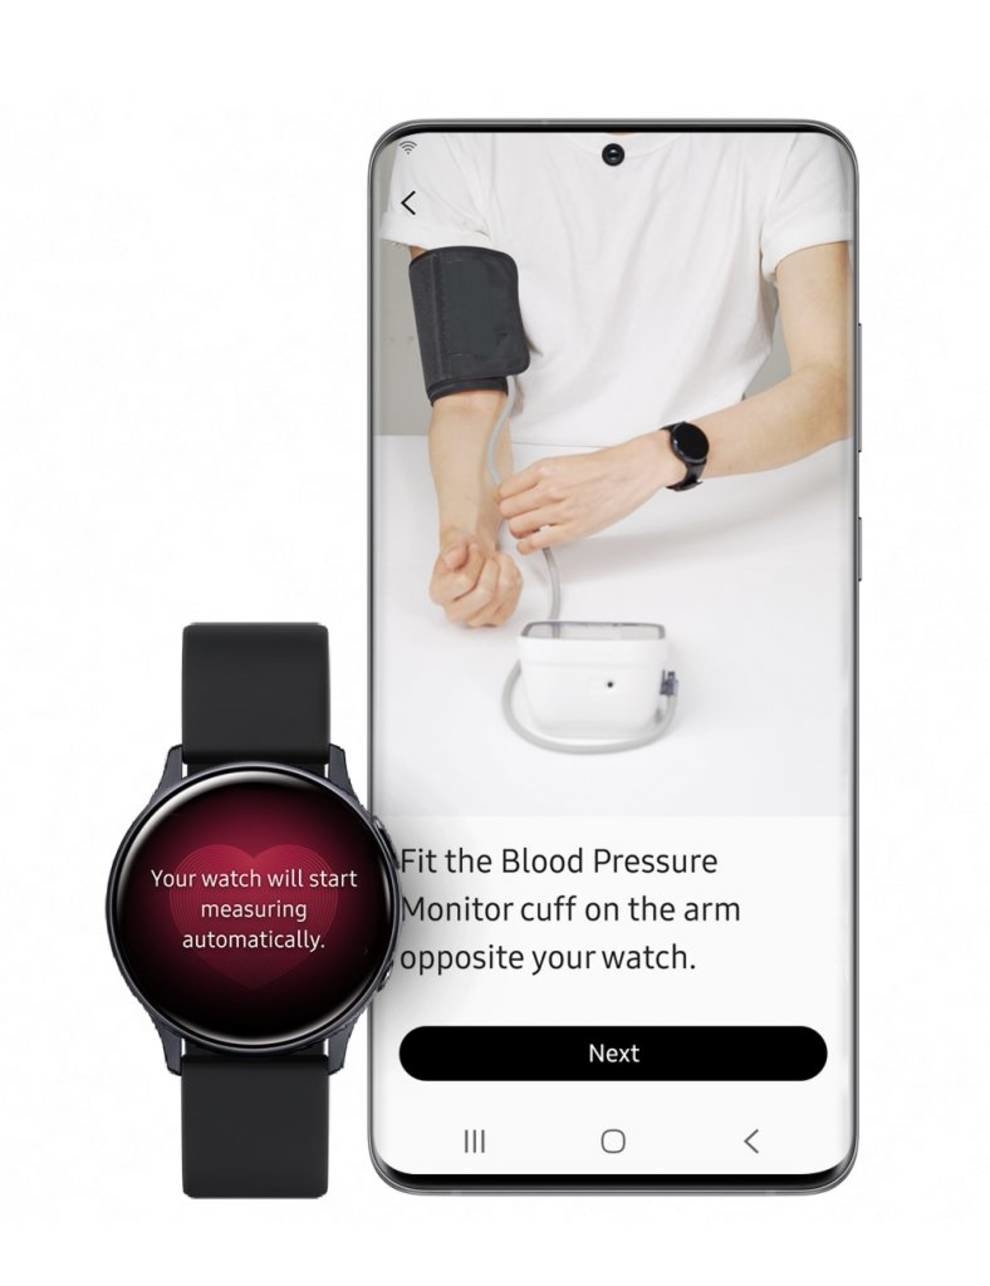 Galaxy Watch will now allow you to monitor blood pressure